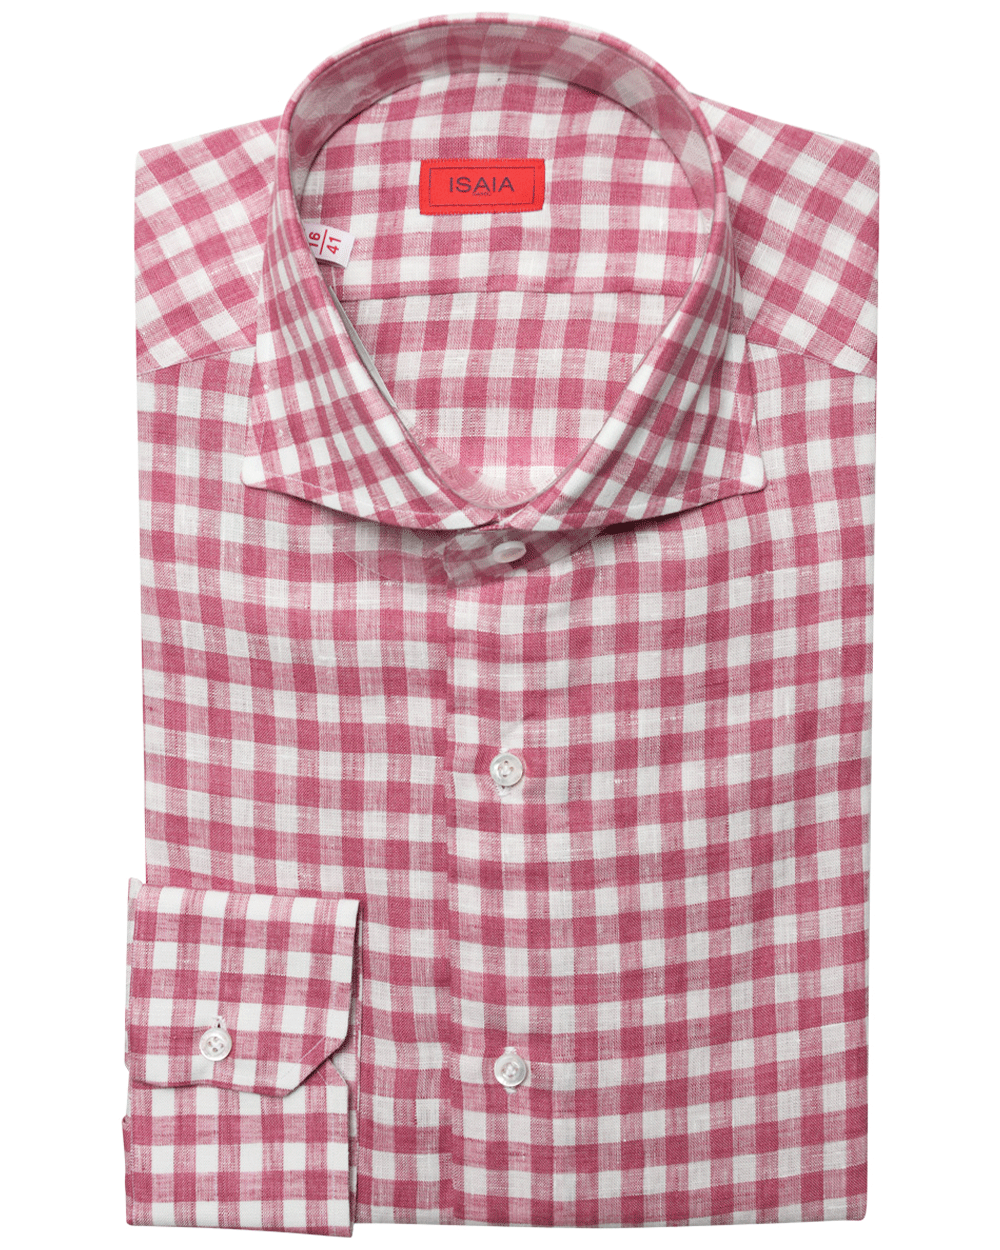 Berry and White Checked Linen Dress Shirt